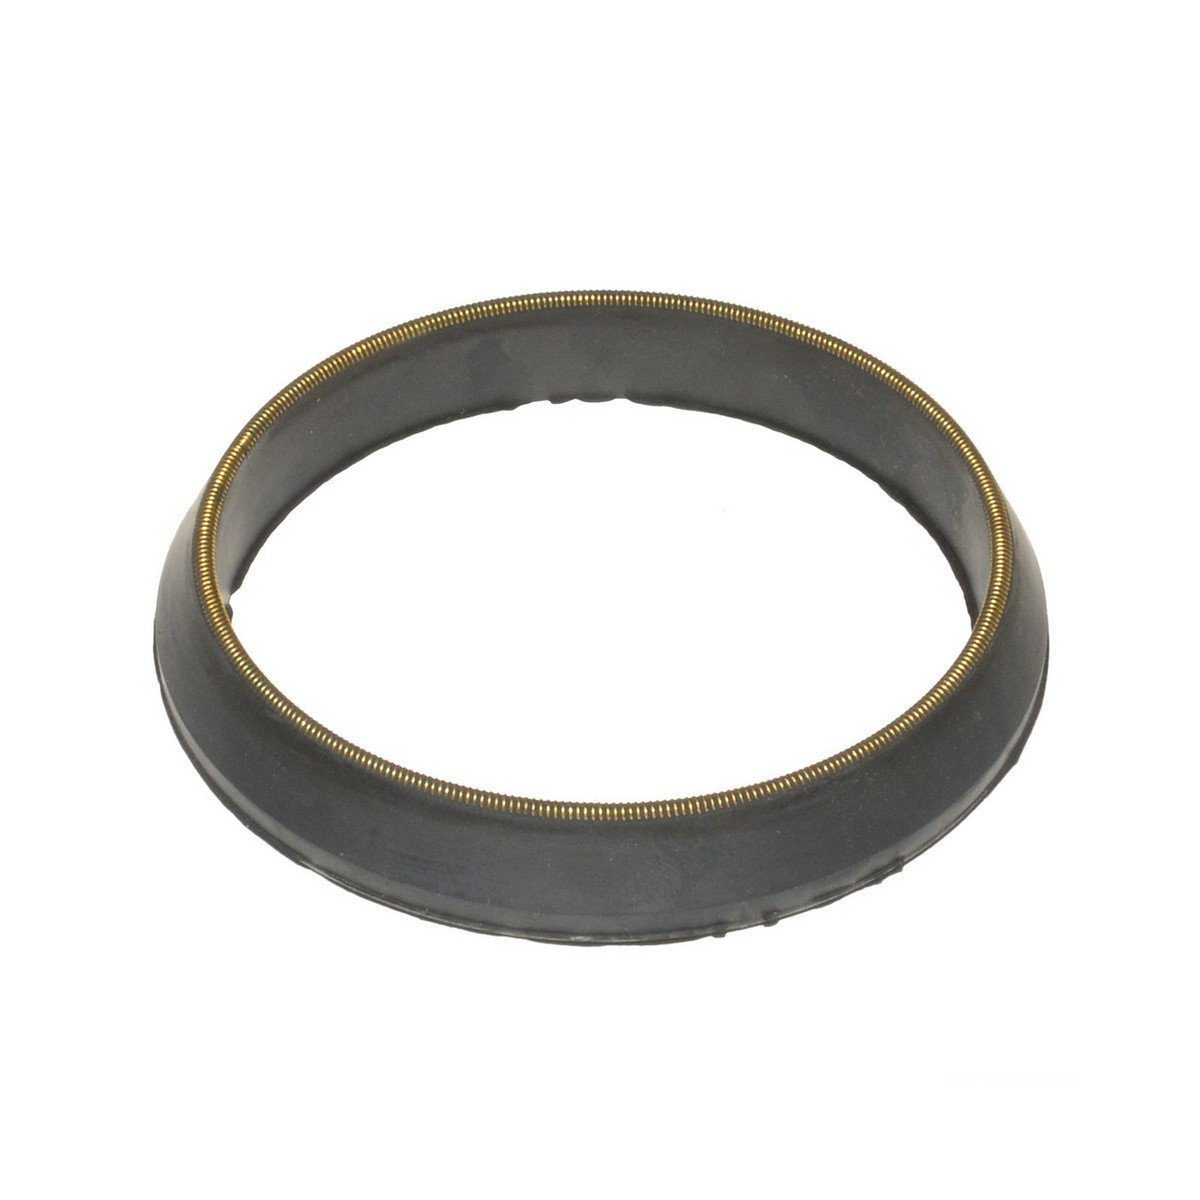 Ring Type JointRTJ-R, RX & BX Gaskets in Stock